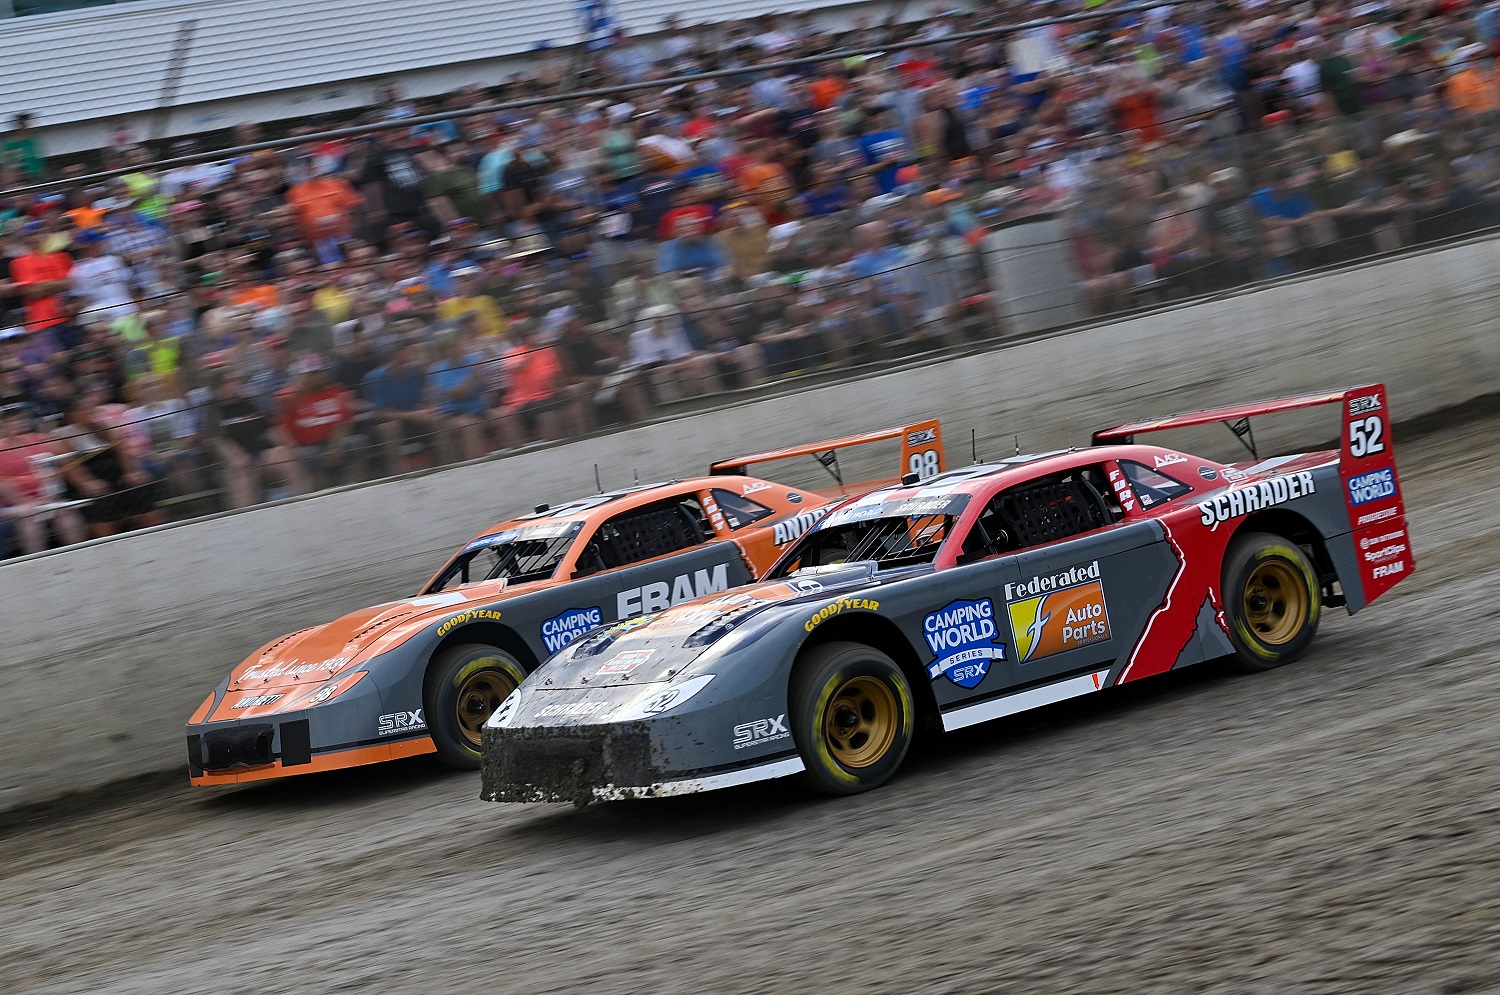 Ken Schrader, driver of No. 52, and Marco Andretti, driver of No. 98, compete in a heat race at a Camping World Superstar Racing Experience at I-55 Raceway on July 16, 2022 in Pevely, Missouri. | Jeff Curry/SRX/Getty Images